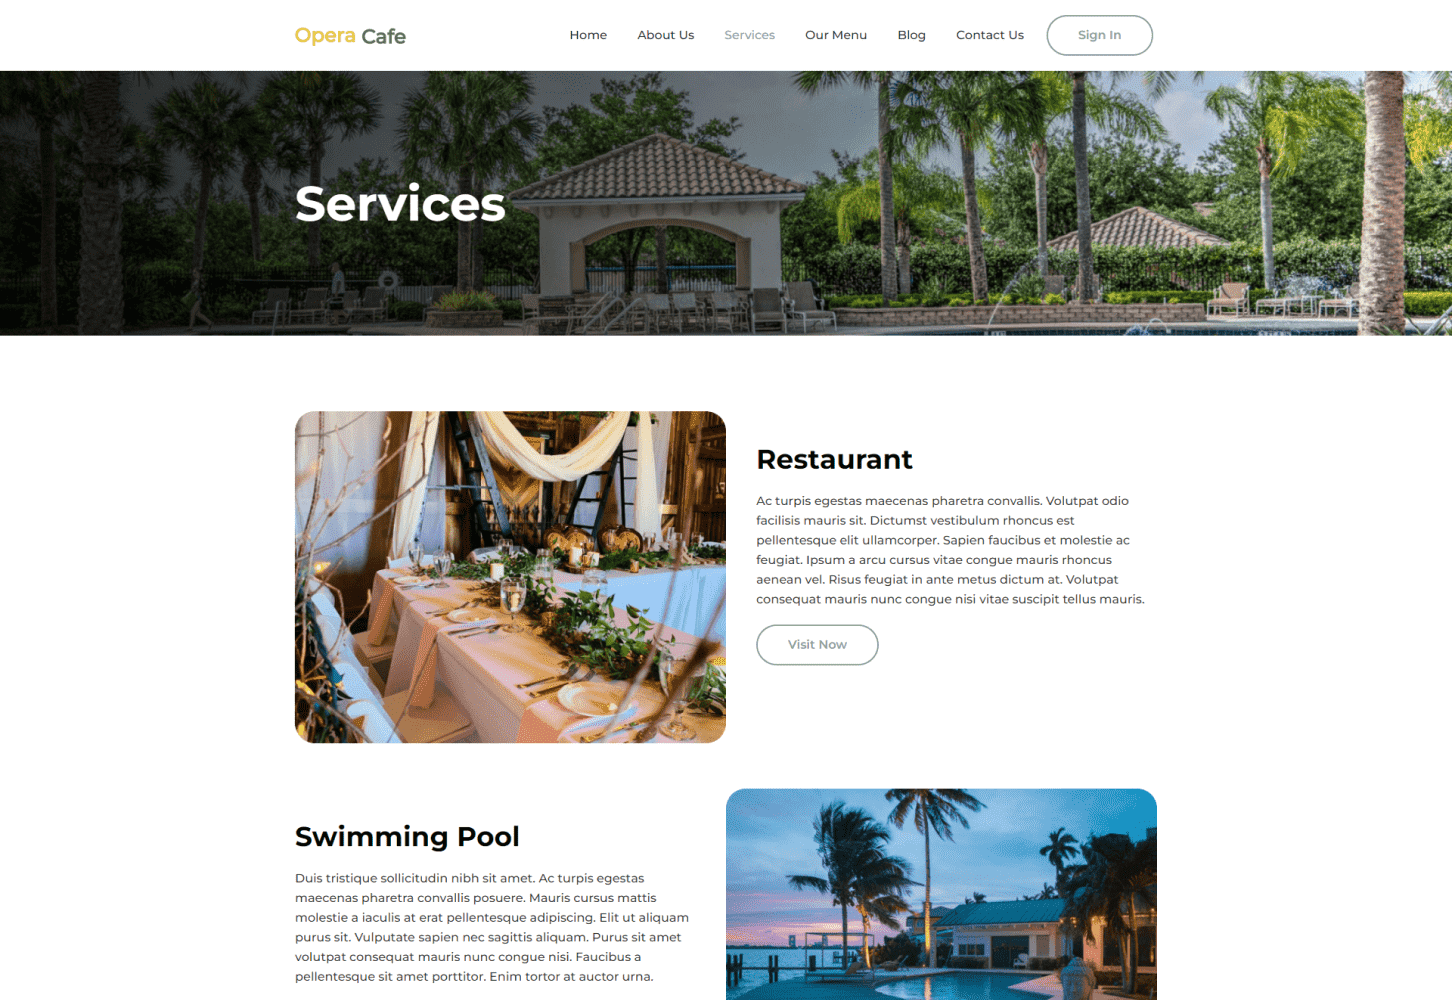 Opera Cafe Services